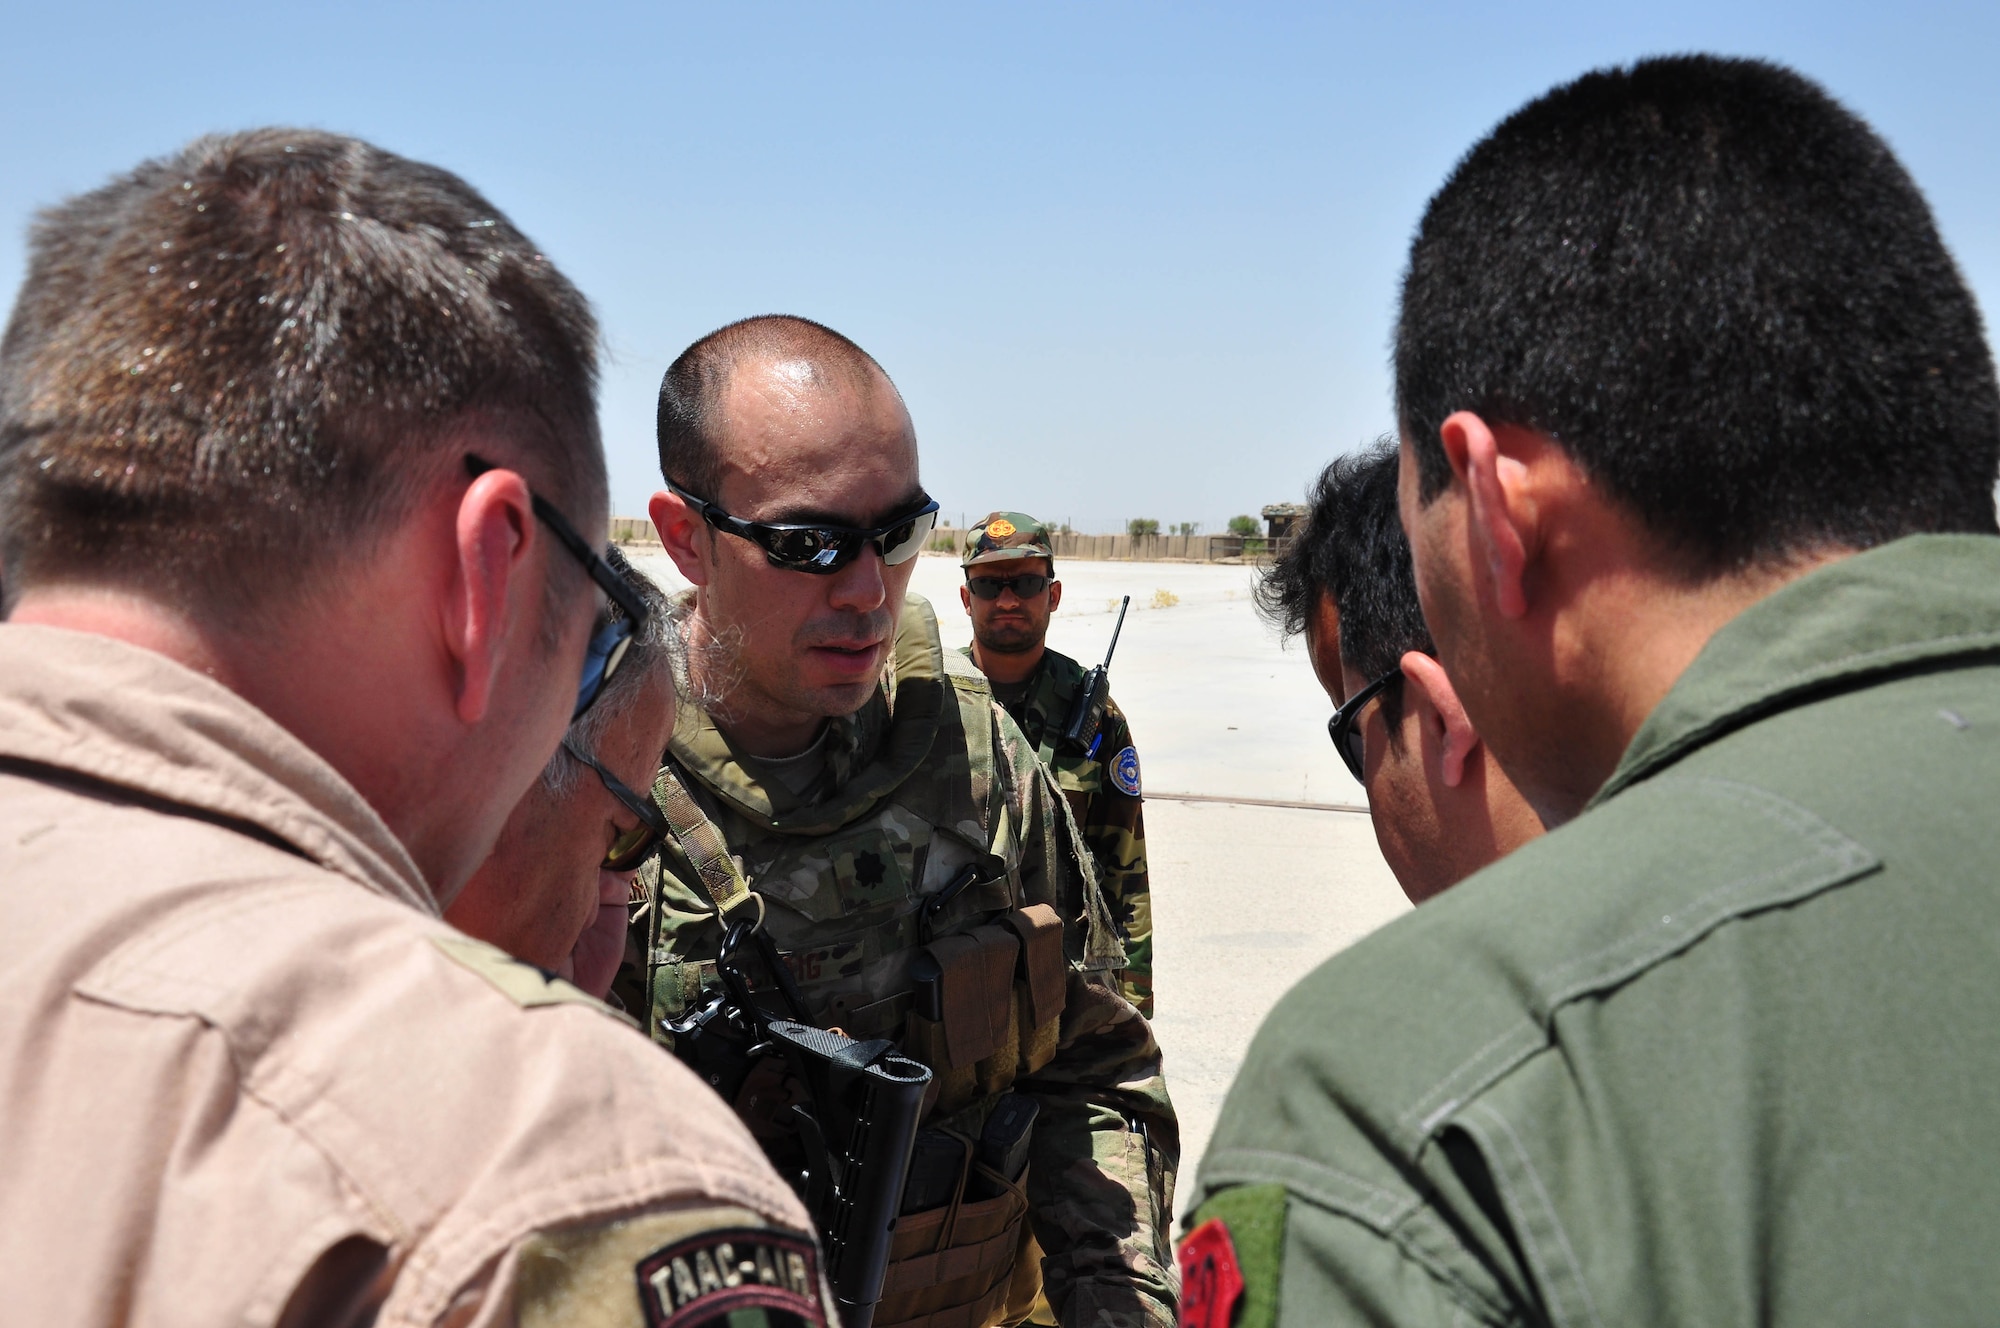 Lt. Col. Dan Craig, Train, Advise, Assist Command – Air (TAAC-Air) engineer, briefs Brig. Gen. David Hicks, 438th Air Expeditionary Wing and TAAC-Air commander, and Afghan Air Force Commander Lt. Gen. Abdul Wahab, during a visit to Mazar-e-Sharif, Afghanistan, July 21, 2016. Craig took the group to look at aircraft ramp projects in support of future AAF operations. (U.S. Air Force photo by Capt. Jason Smith) 